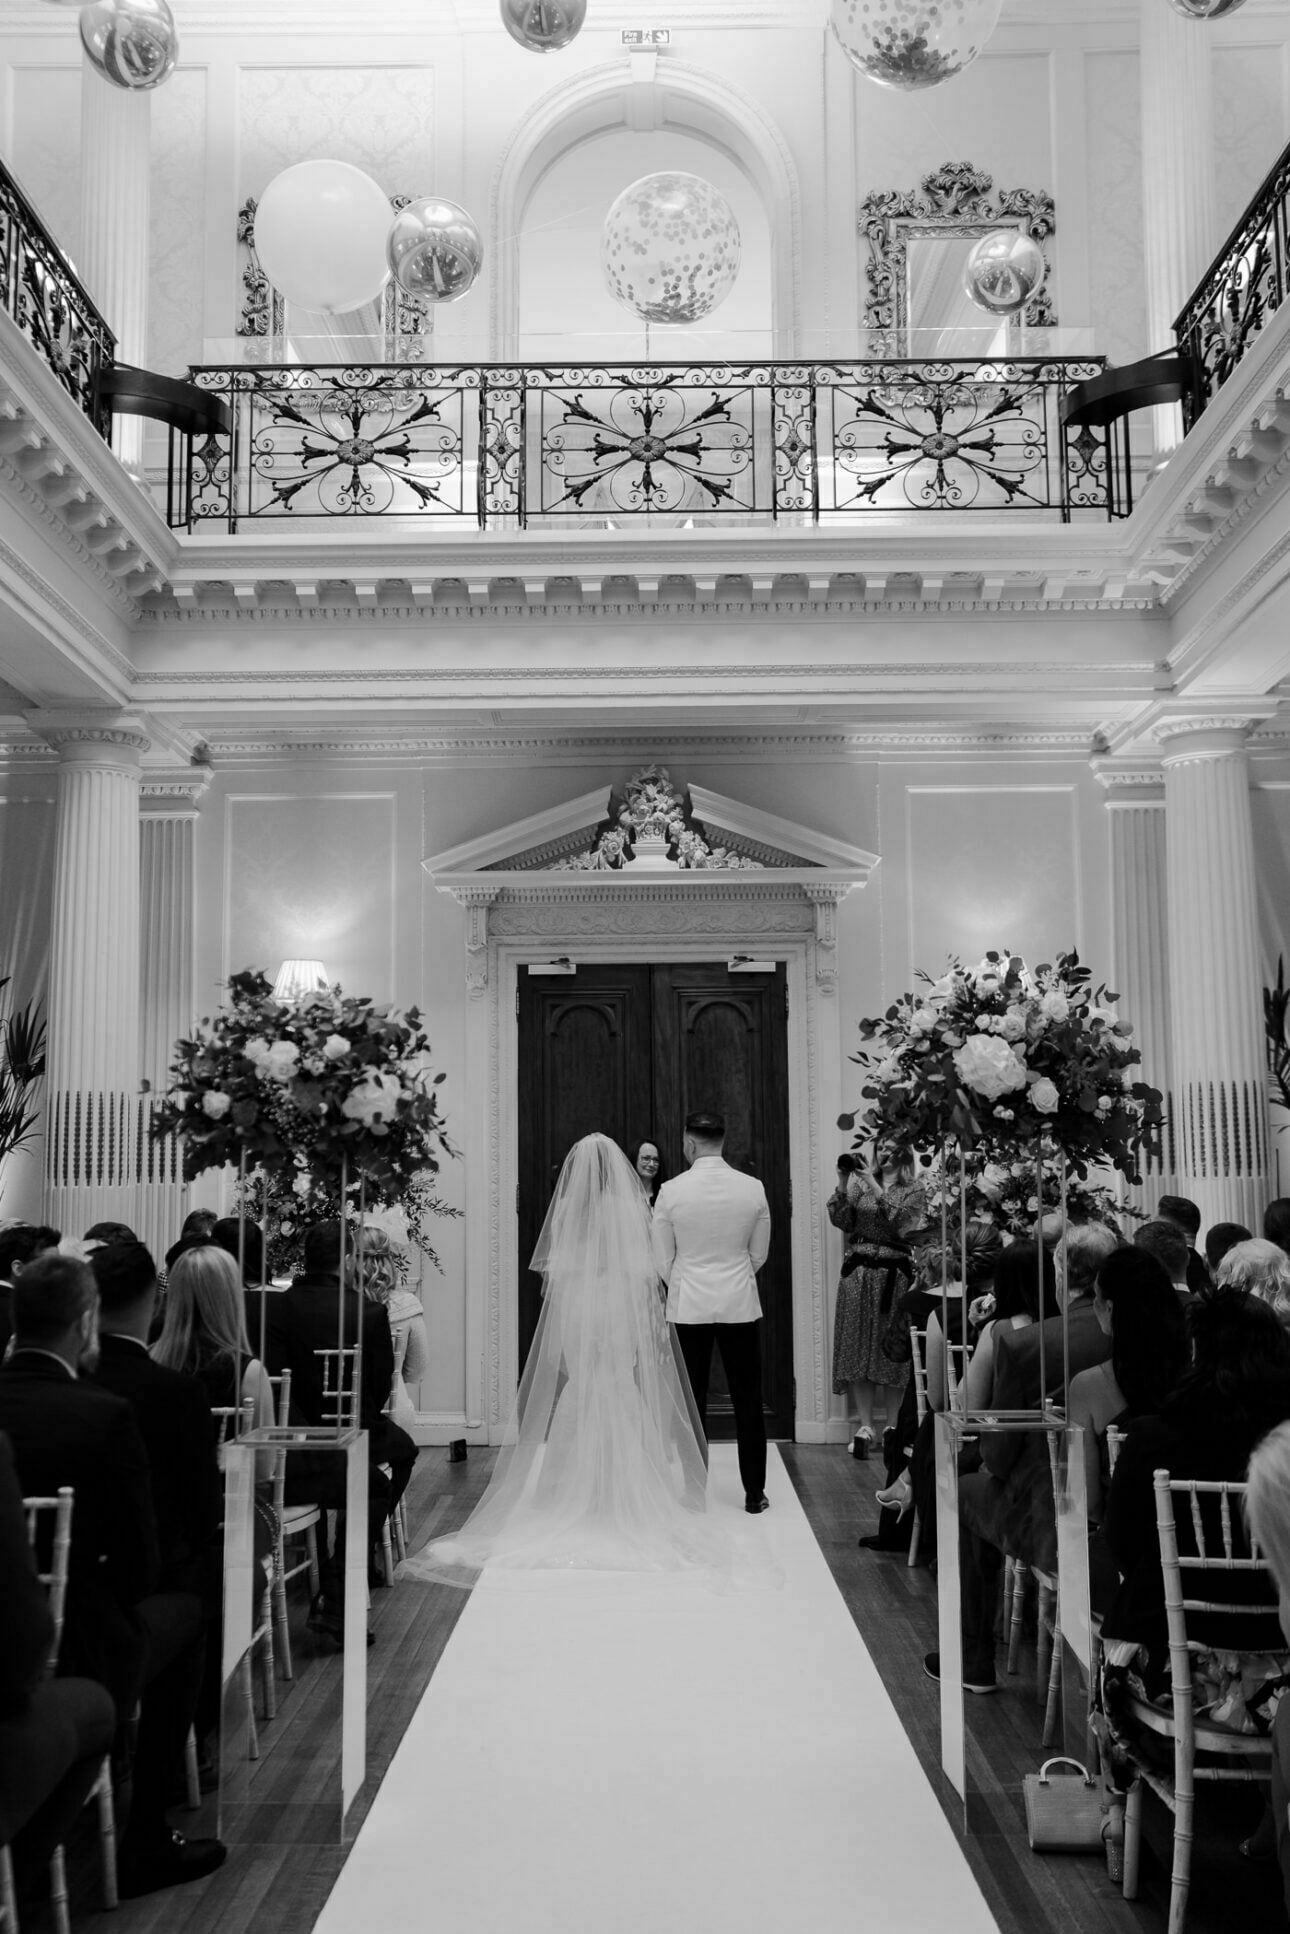 Ceremony room at Hedsor house